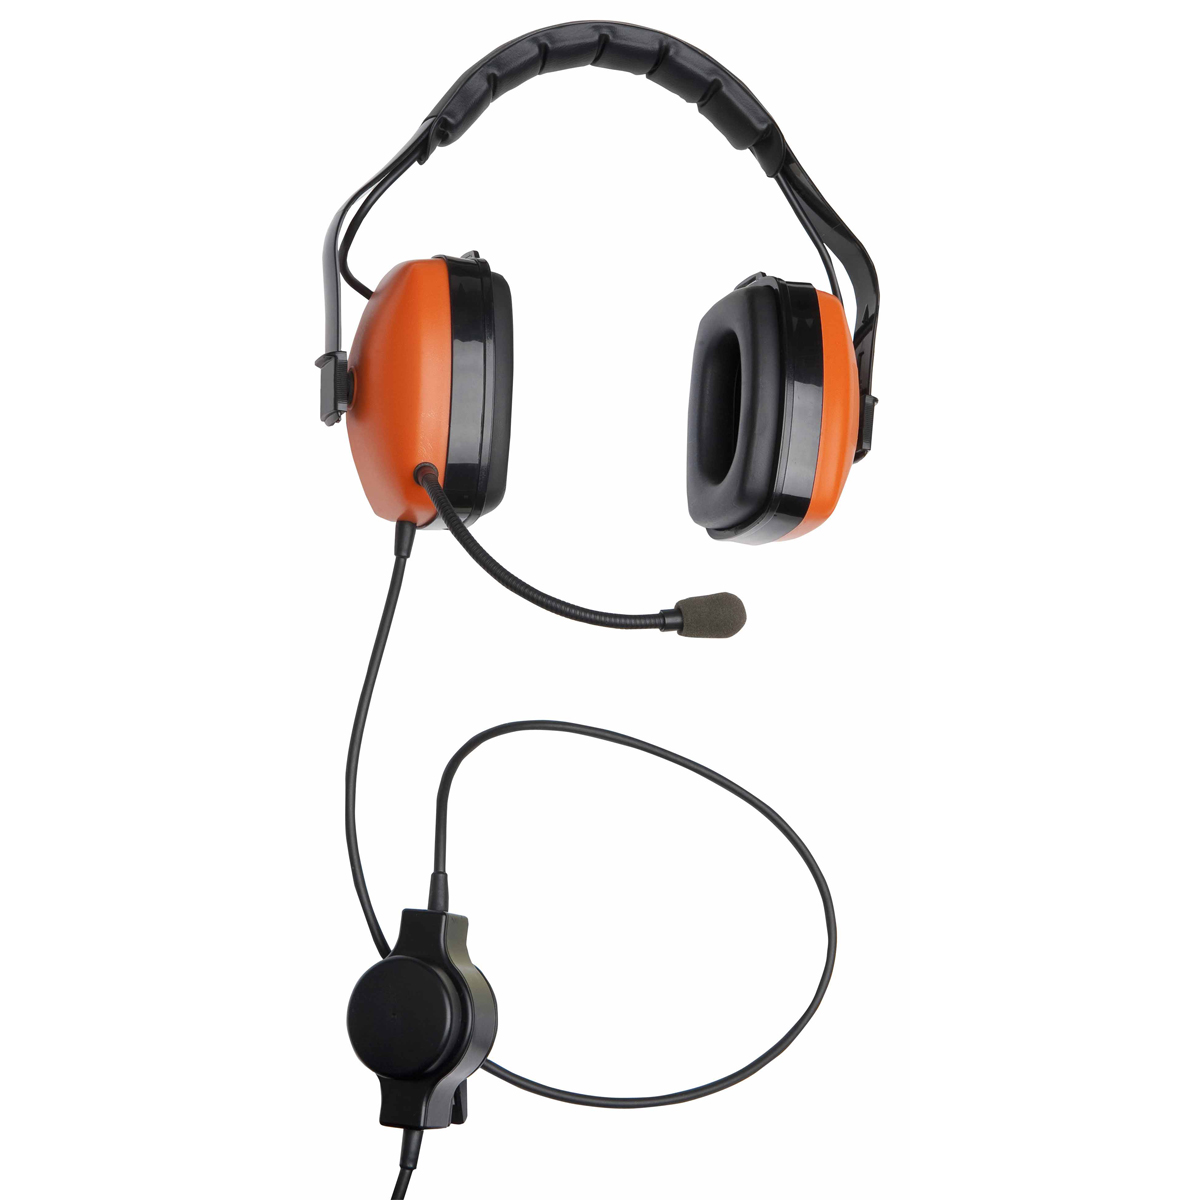 Headset for Ex zones 1 and 2 for use in noisy areas